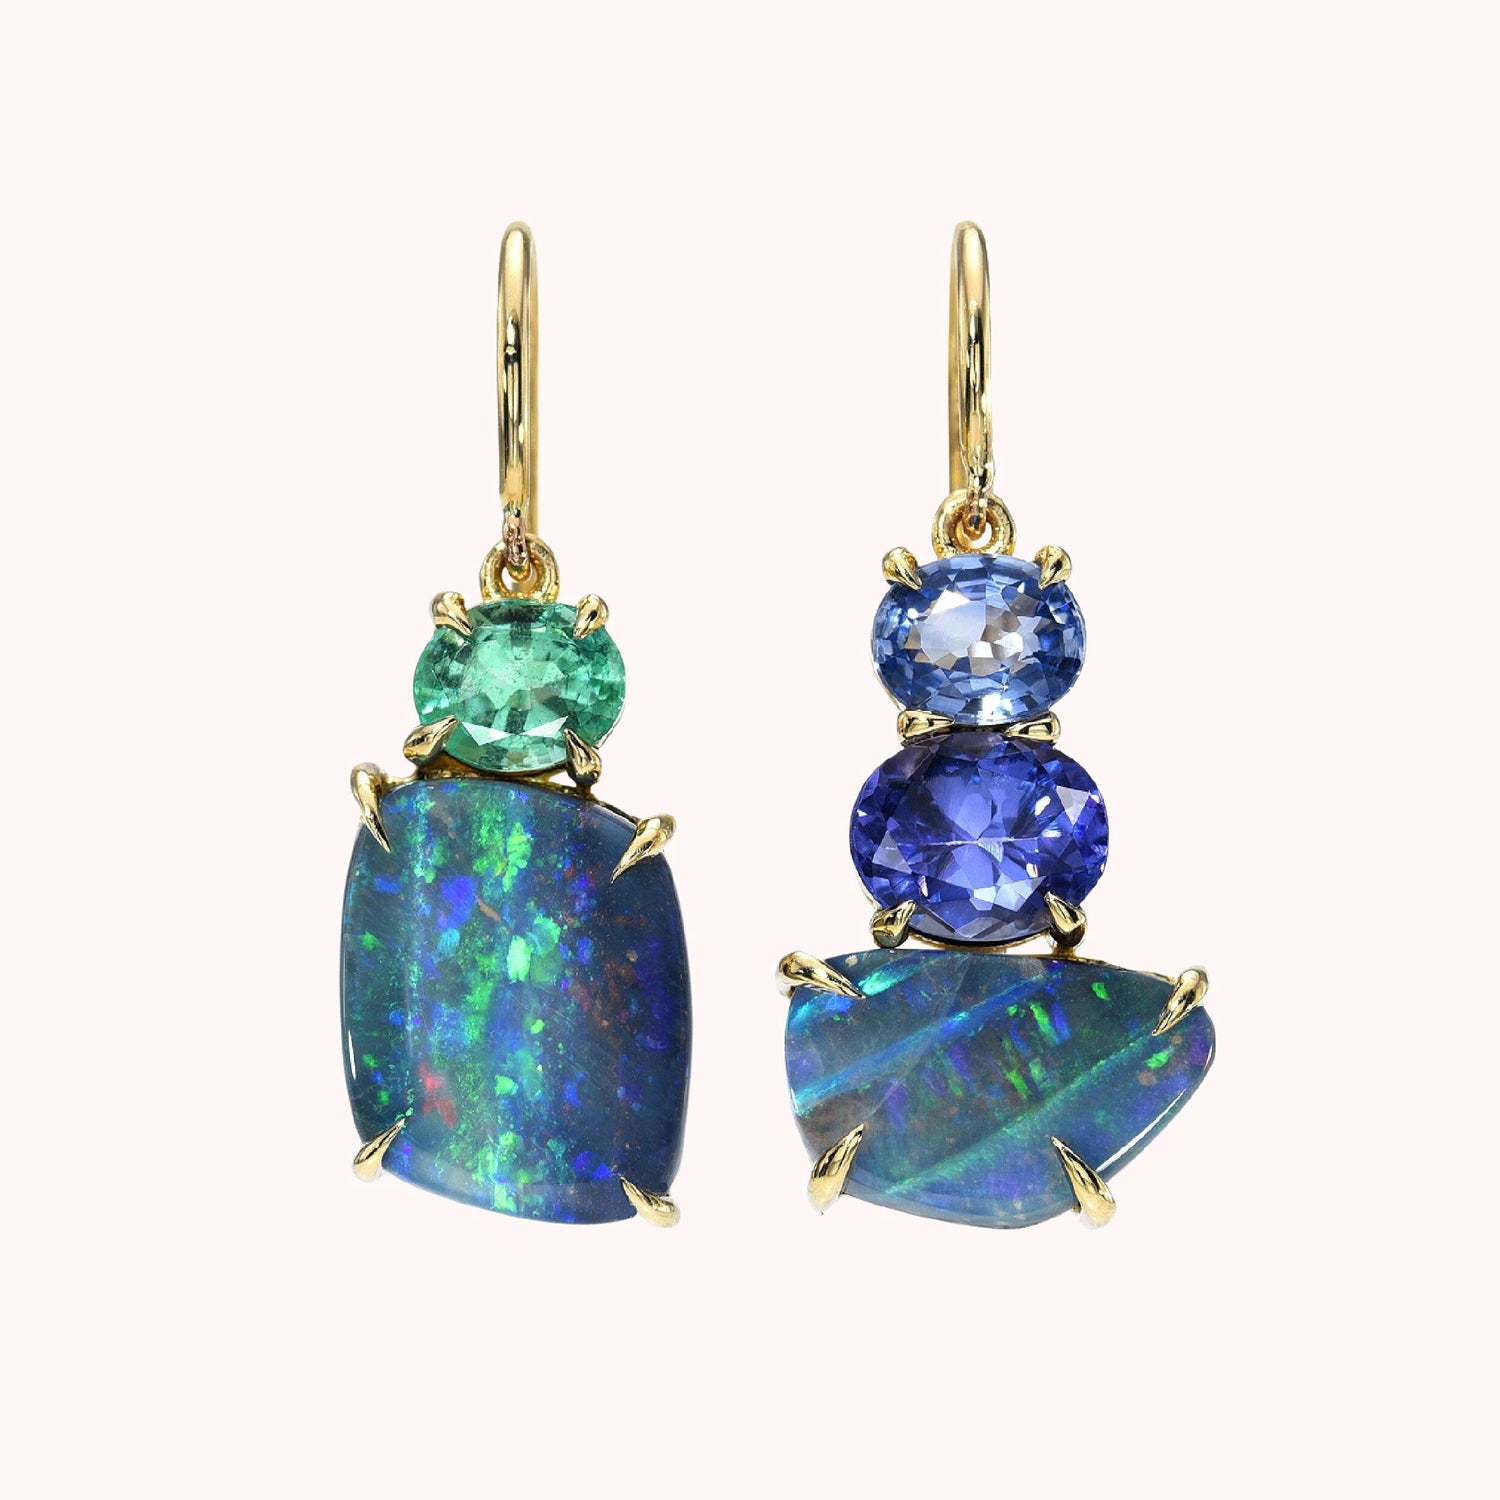 Australian Opal Earrings by NIXIN Jewelry in 14k gold with emeralds, sapphire and tanzanite.